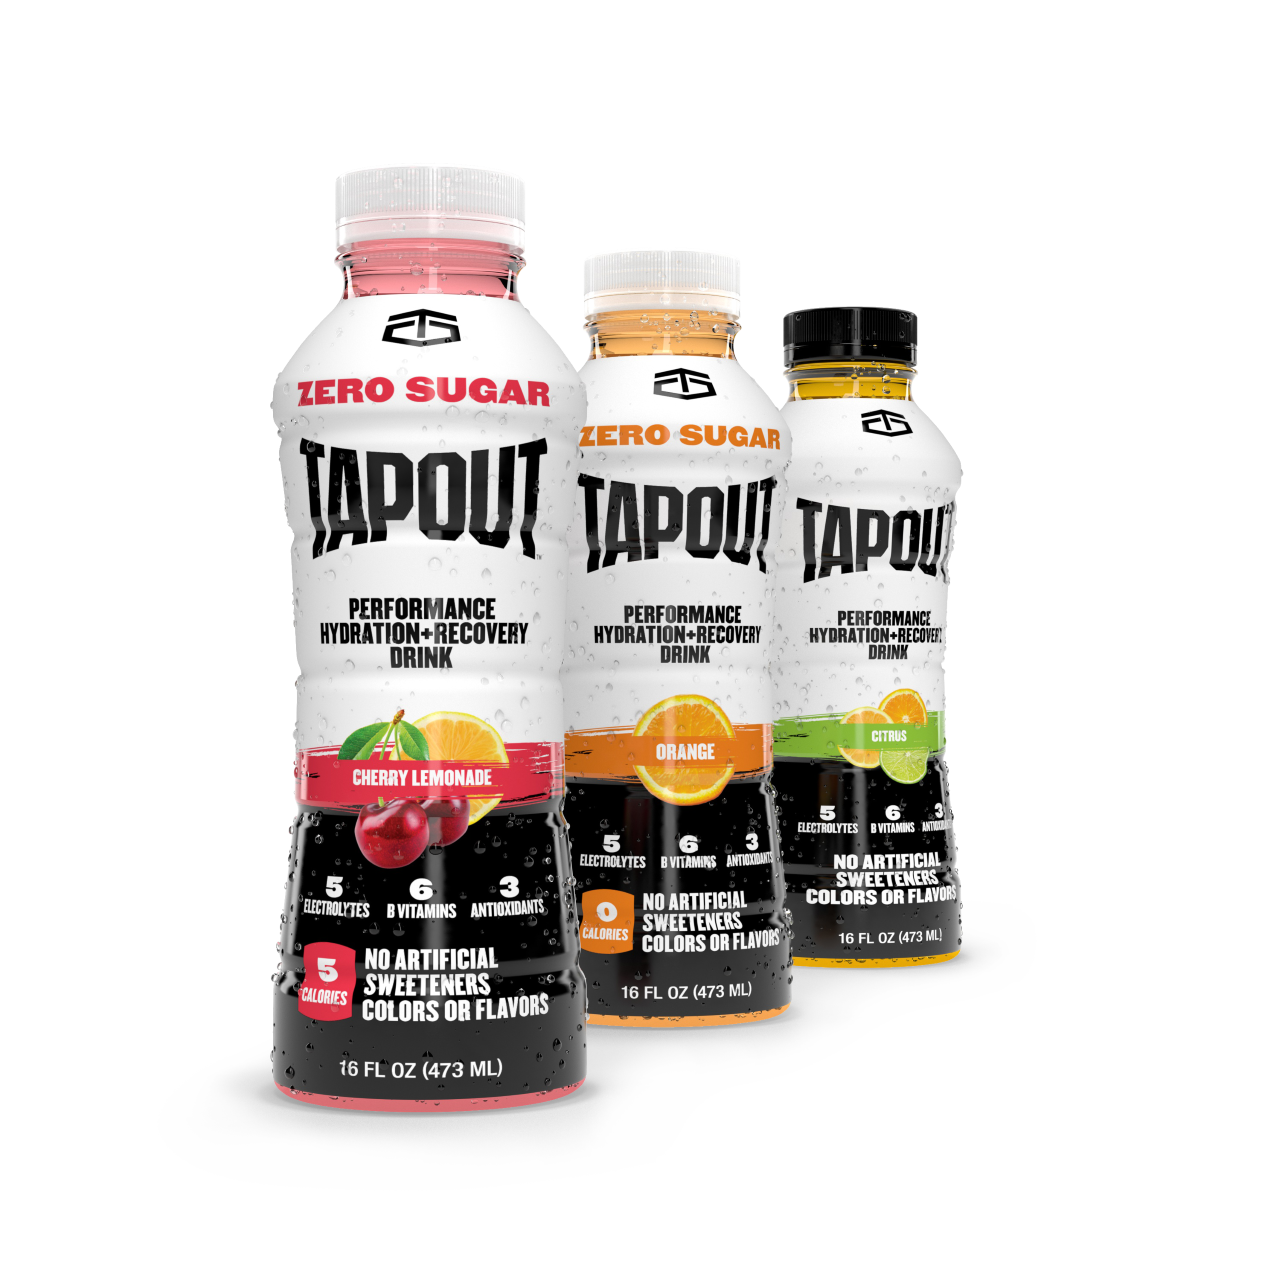 TapouT, an international lifestyle brand of high-performance sports drinks